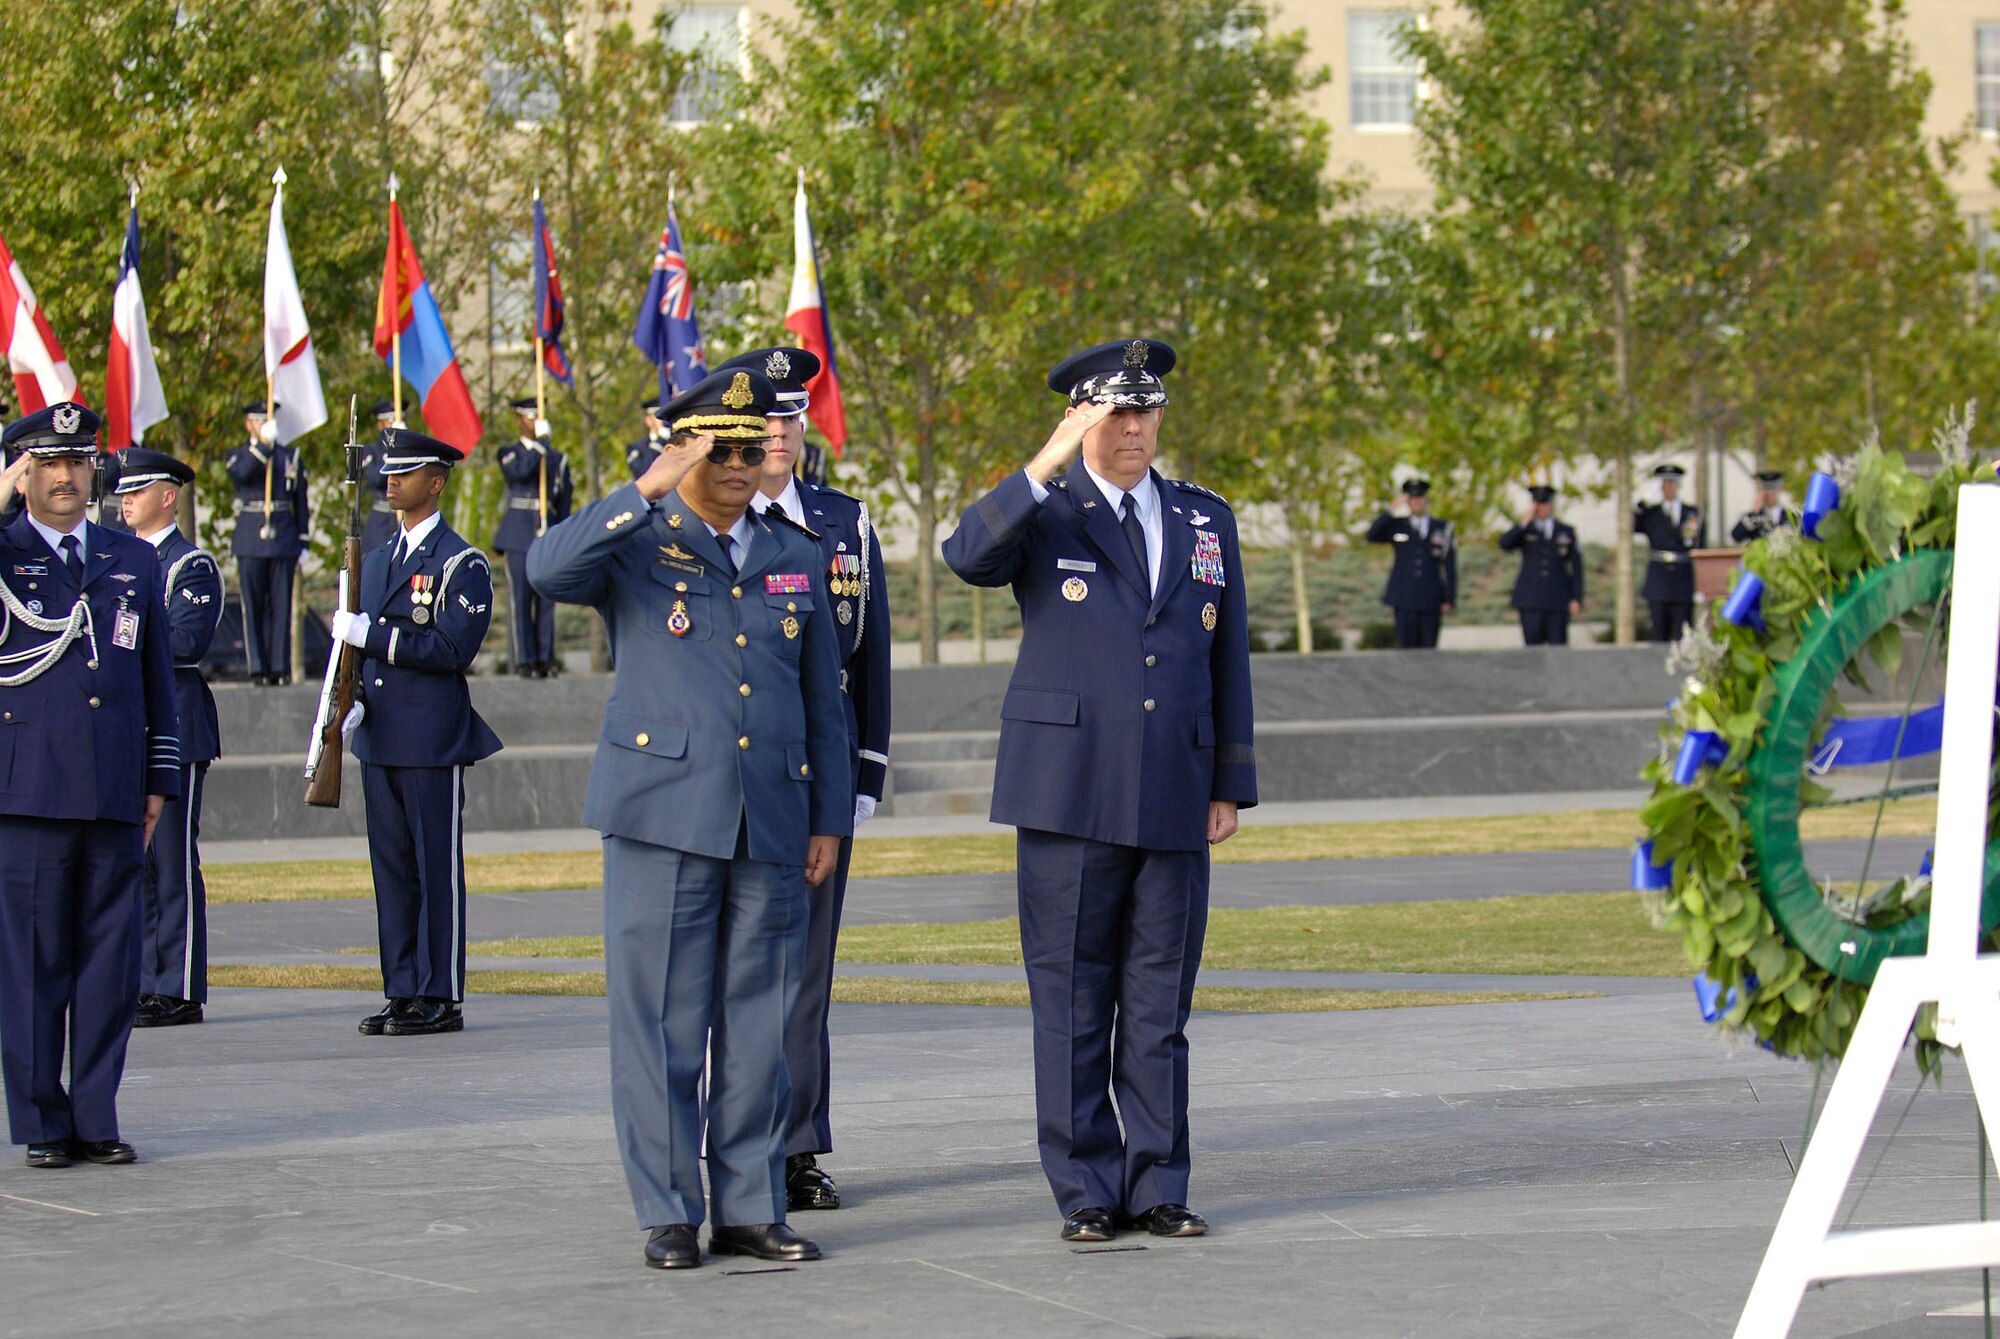 Air Force Chief of Staff Gen. T. Michael Moseley and Lt. Gen. Soeung Samnang salute during a foreign dignitary arrival and wreath-laying ceremony at the Air Force Memorial in Arlington, Va., on Tuesday, Oct. 24.  (U.S. Air Force photo/Senior Airman Desiree Andrejcik) 
